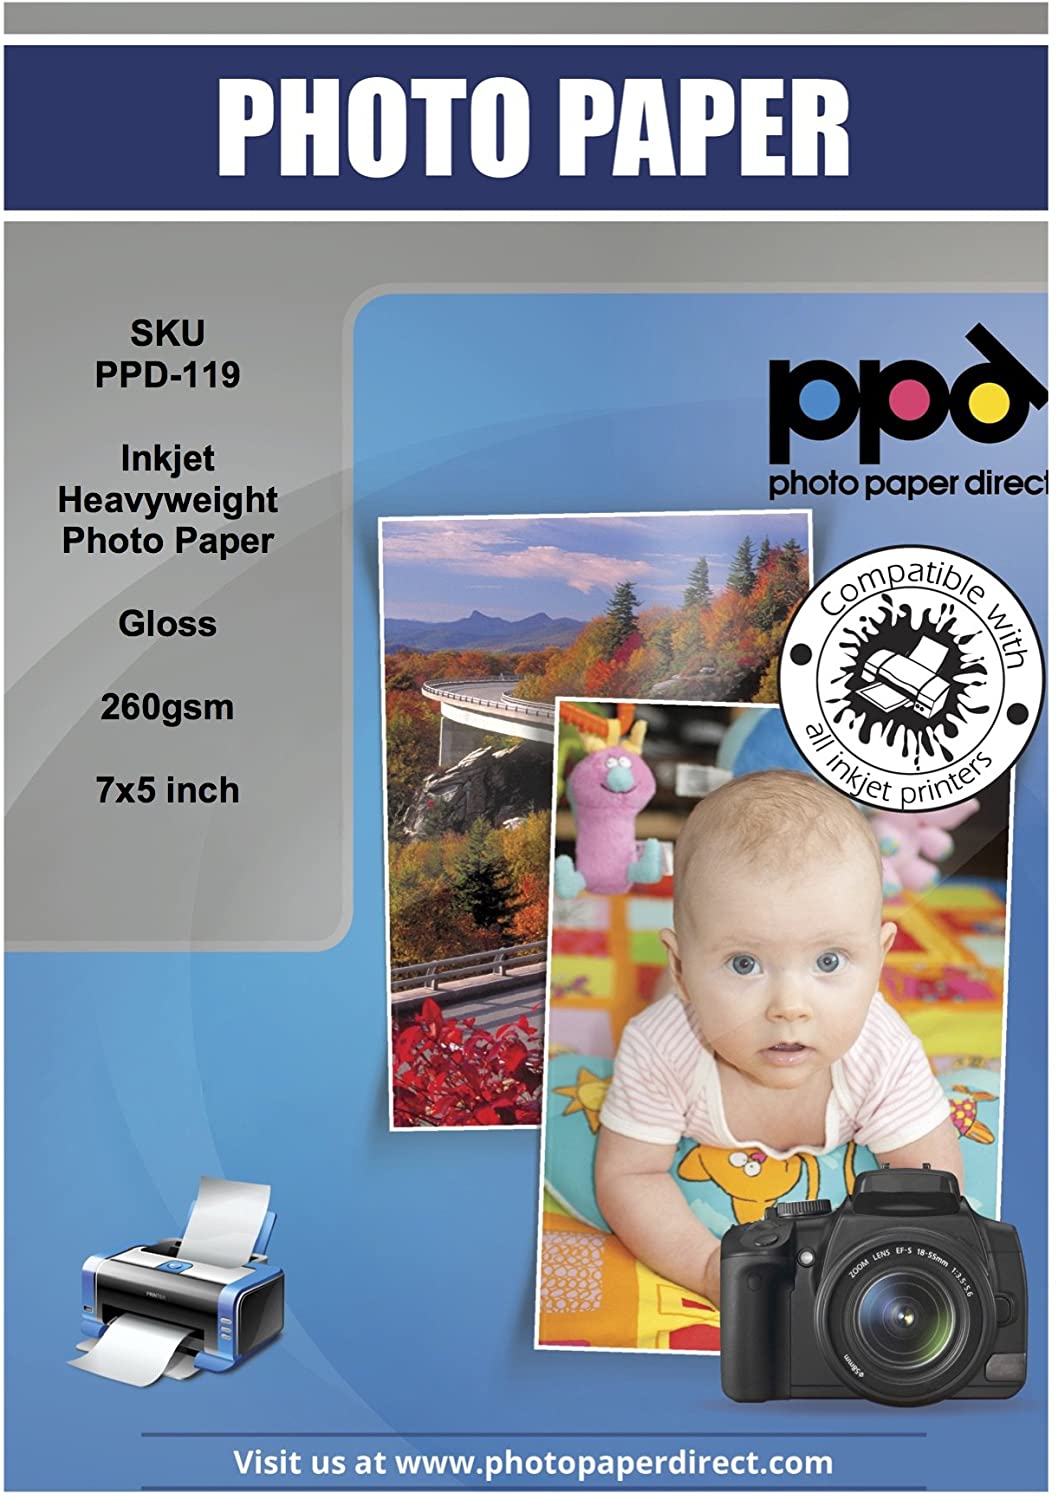 PPD Inkjet Heavyweight Photo Paper Glossy 64lb. 240gsm 10.9mil 5 x 7" PPD-119